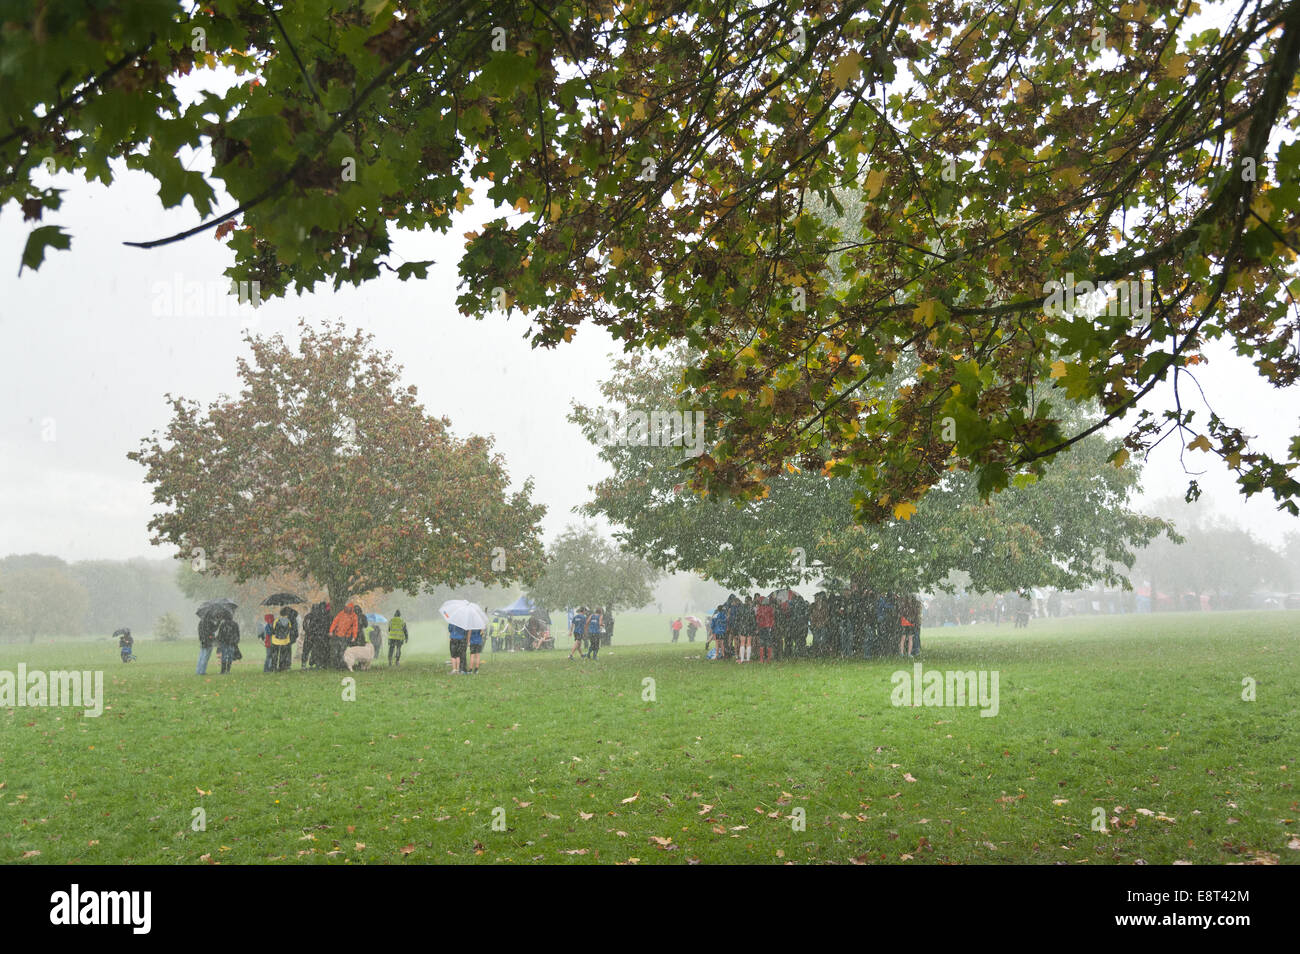 Desperate measures to keep dry as extremely heavy downpour of rain and hail causes people crowds to shelter under trees Stock Photo